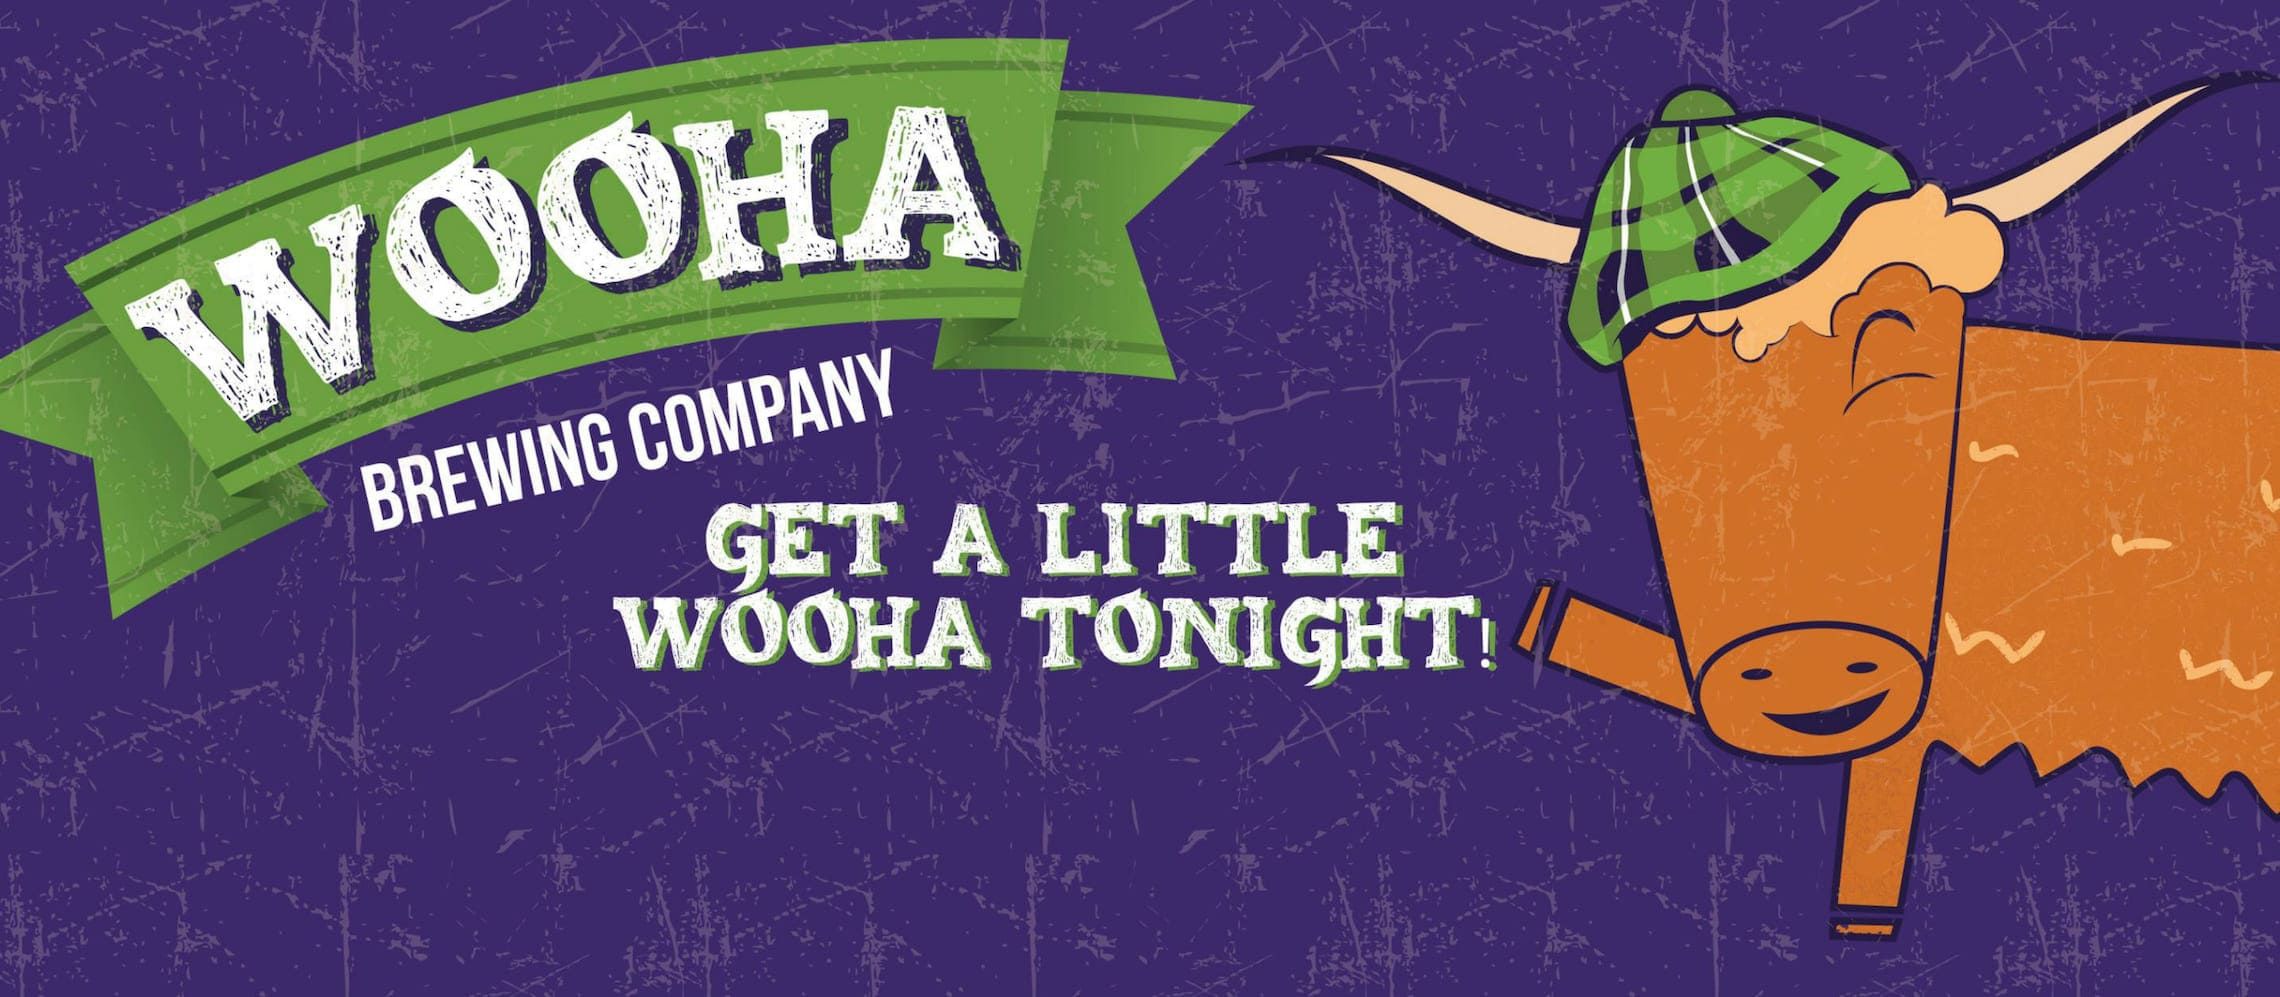 Photo for: Recognition for WooHa Brewing Company’s WooHa Porter